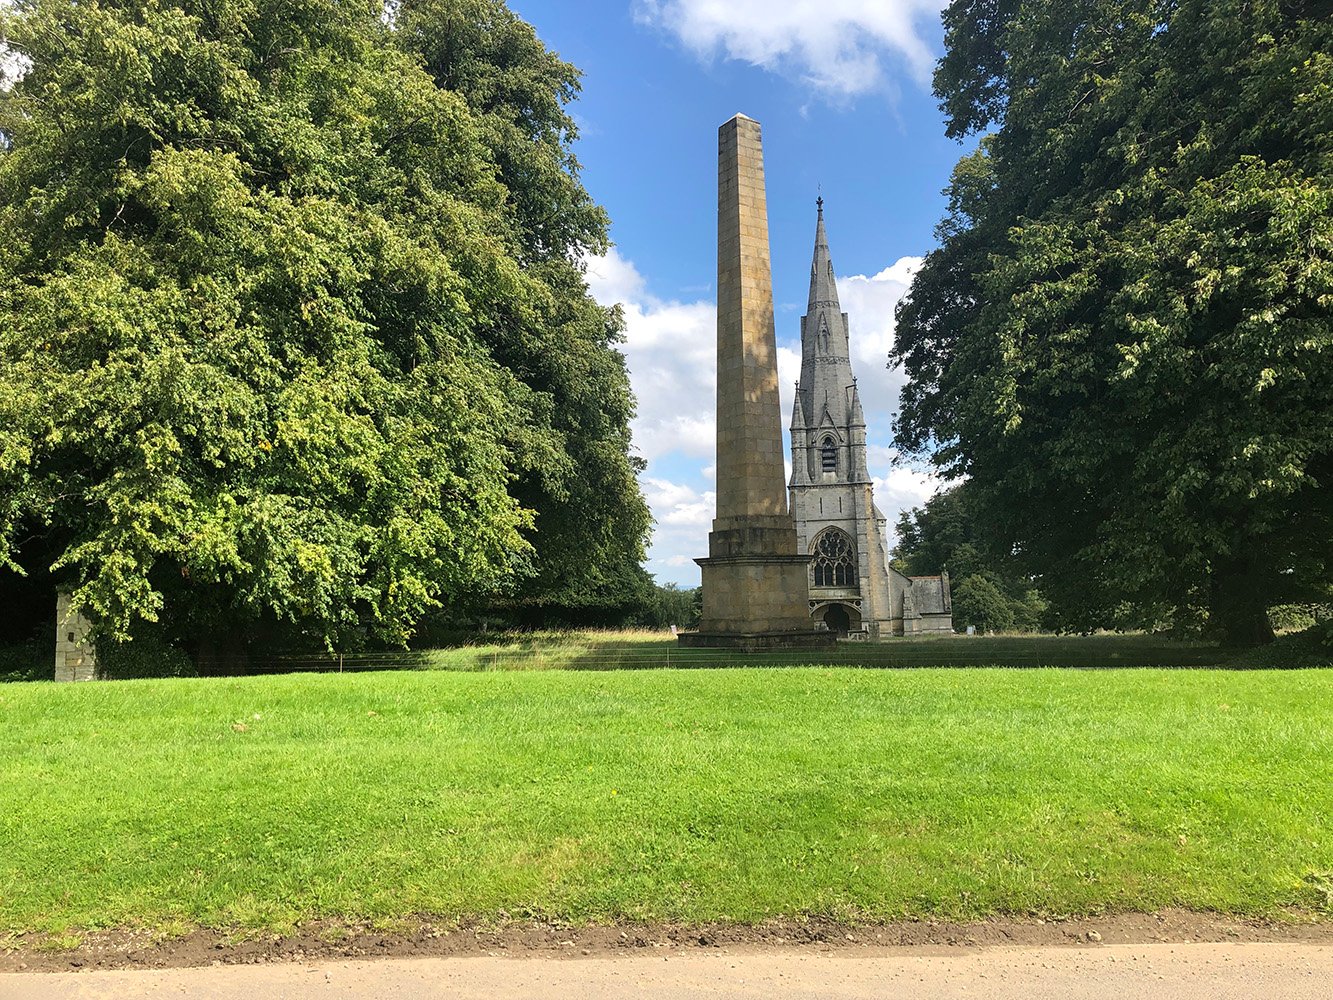 Image name obelisk and church studley royal fountains abbey north yorkshire the 10 image from the post A look at the history of Studley Royal, North Yorkshire, with Dr Emma Wells in Yorkshire.com.